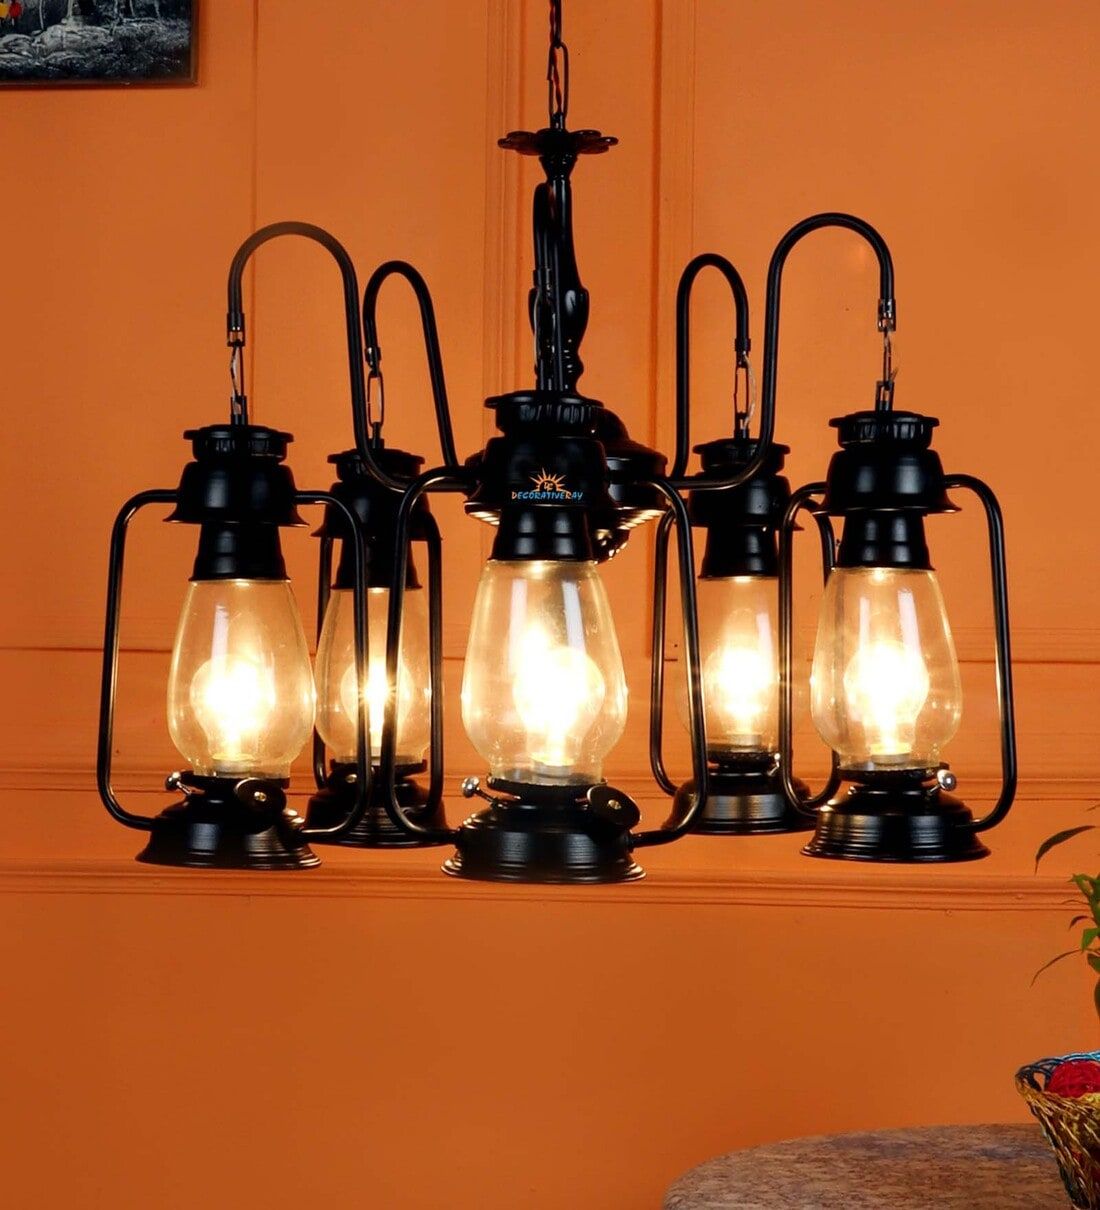 Buy Black Lantern Chandelier In Clear Glassdecorativeray Online –  Shaded Chandeliers – Chandeliers – Lamps And Lighting – Pepperfry Product With Regard To Rustic Black Lantern Chandeliers (Photo 11 of 15)